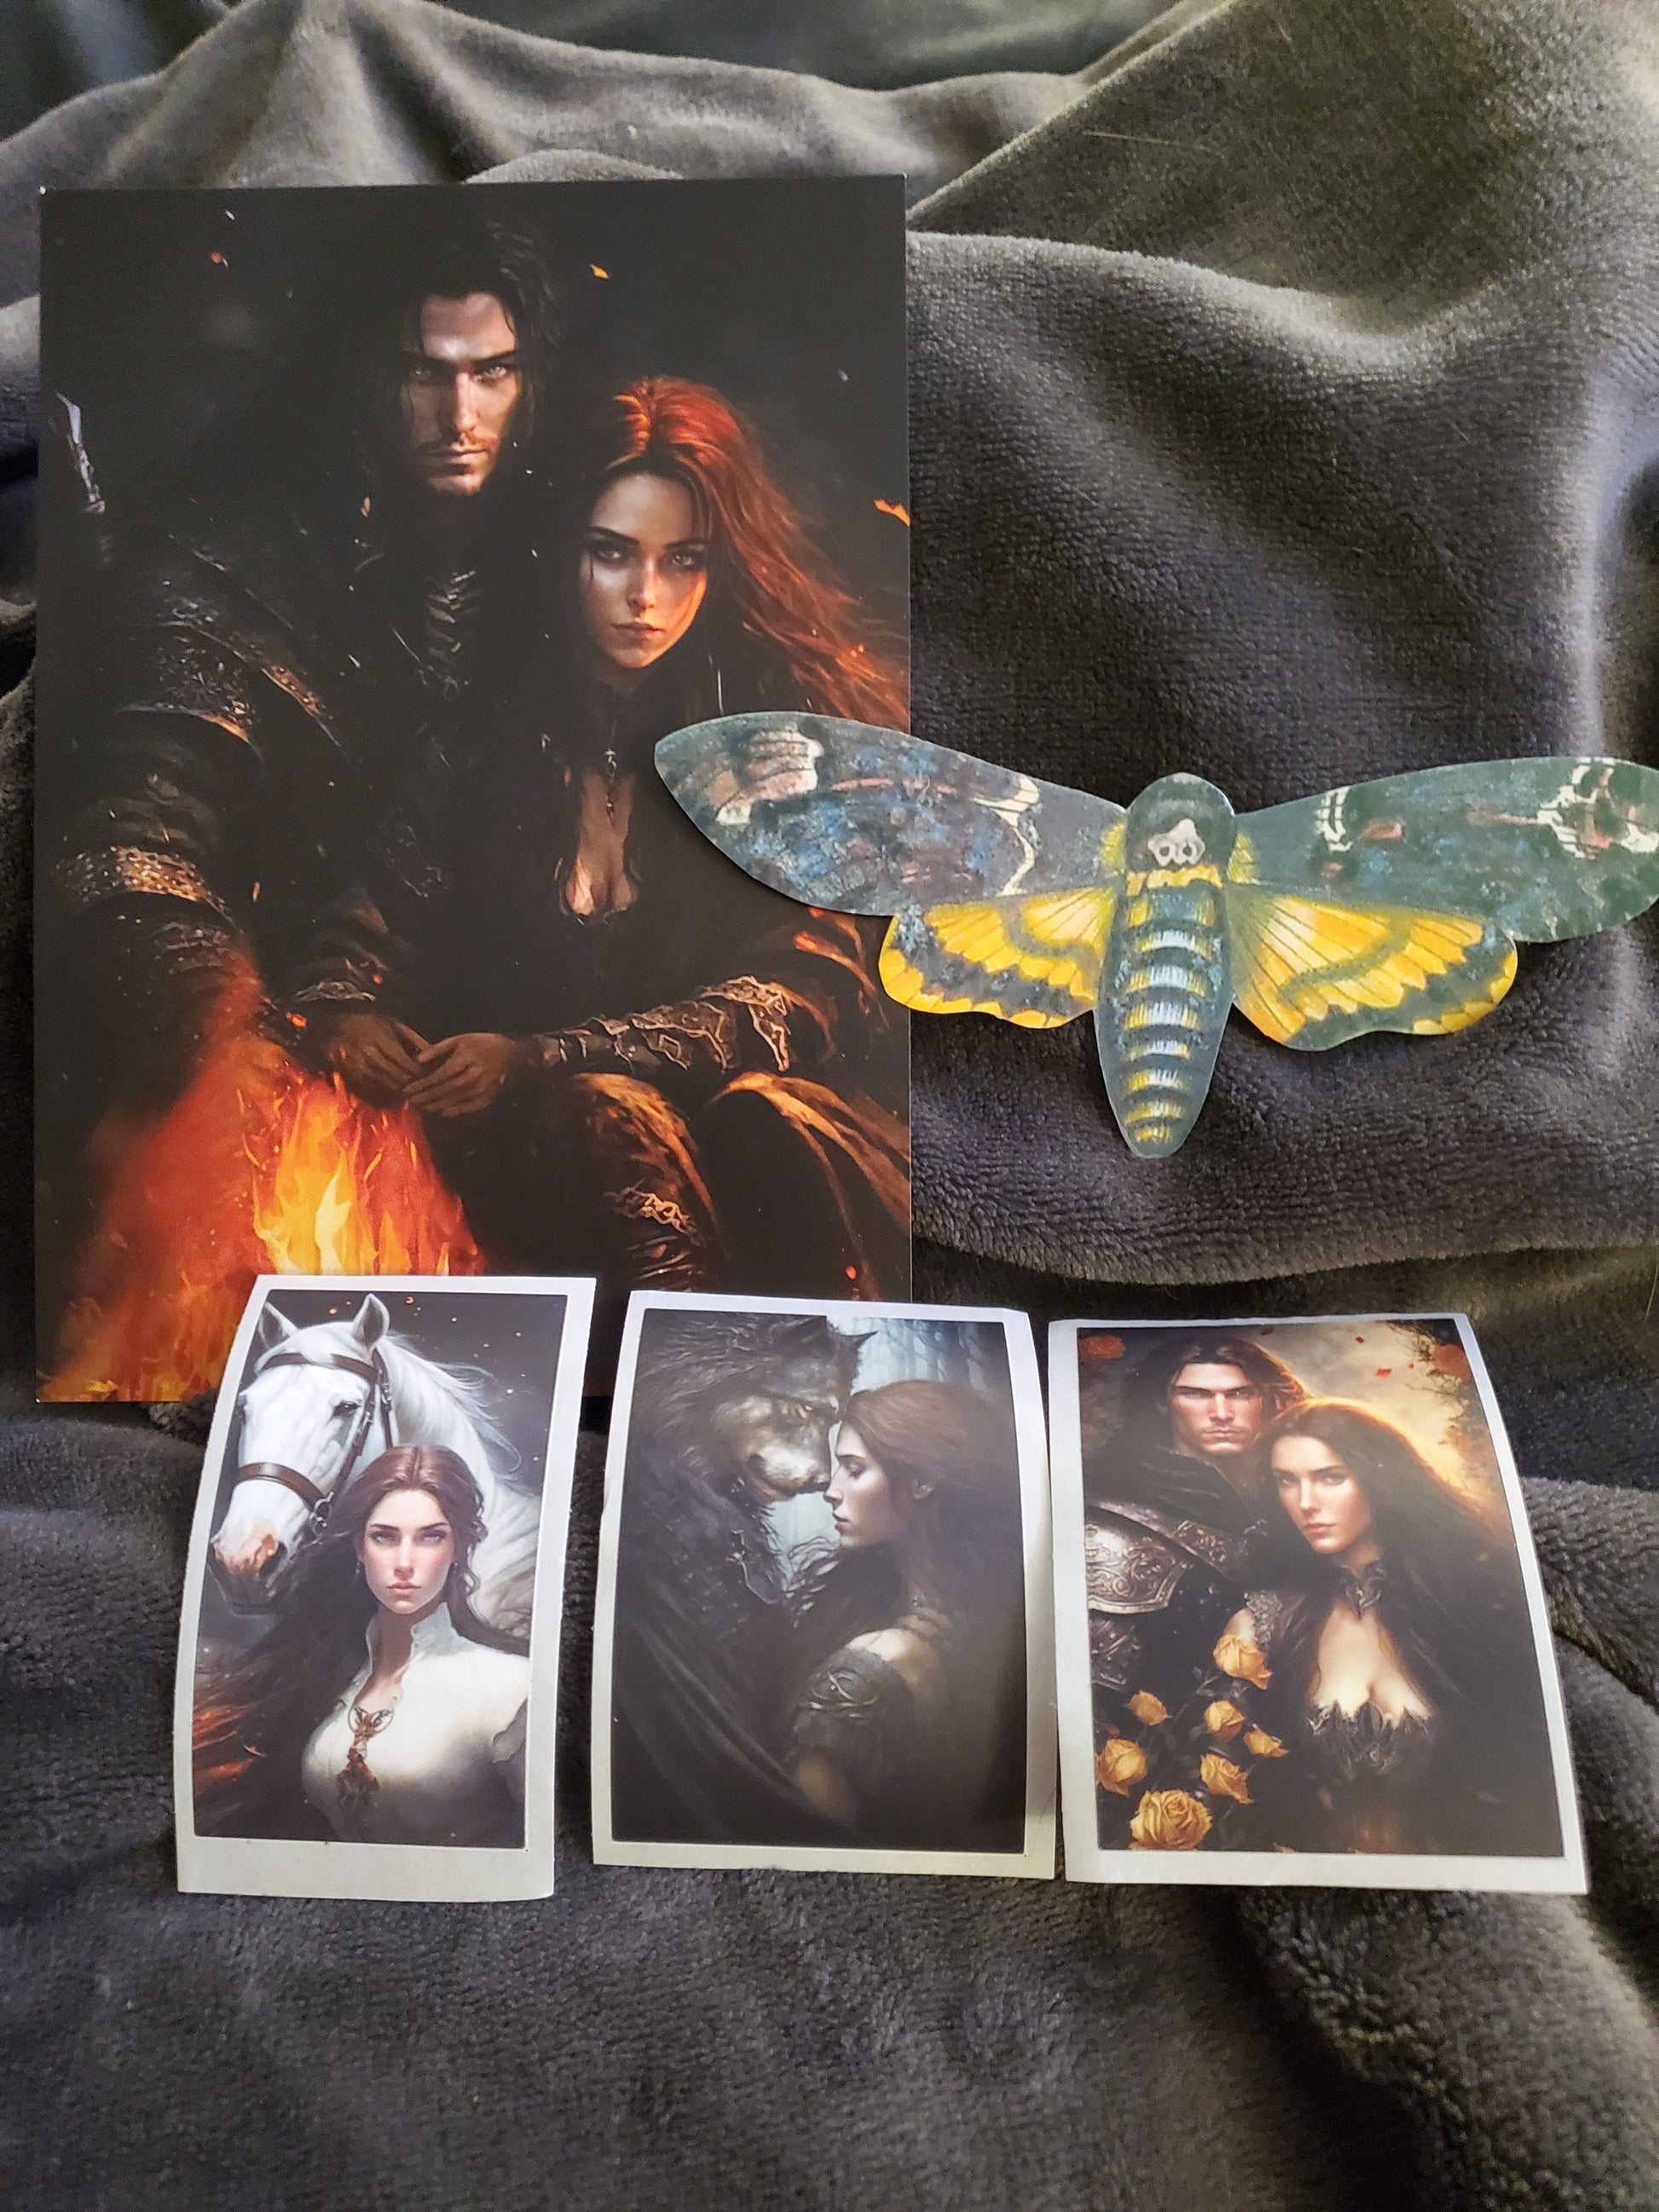 Swag included with Break Her Special Edition. Images show a postcard with Lisane and Rhaim, a moth, and three character images.